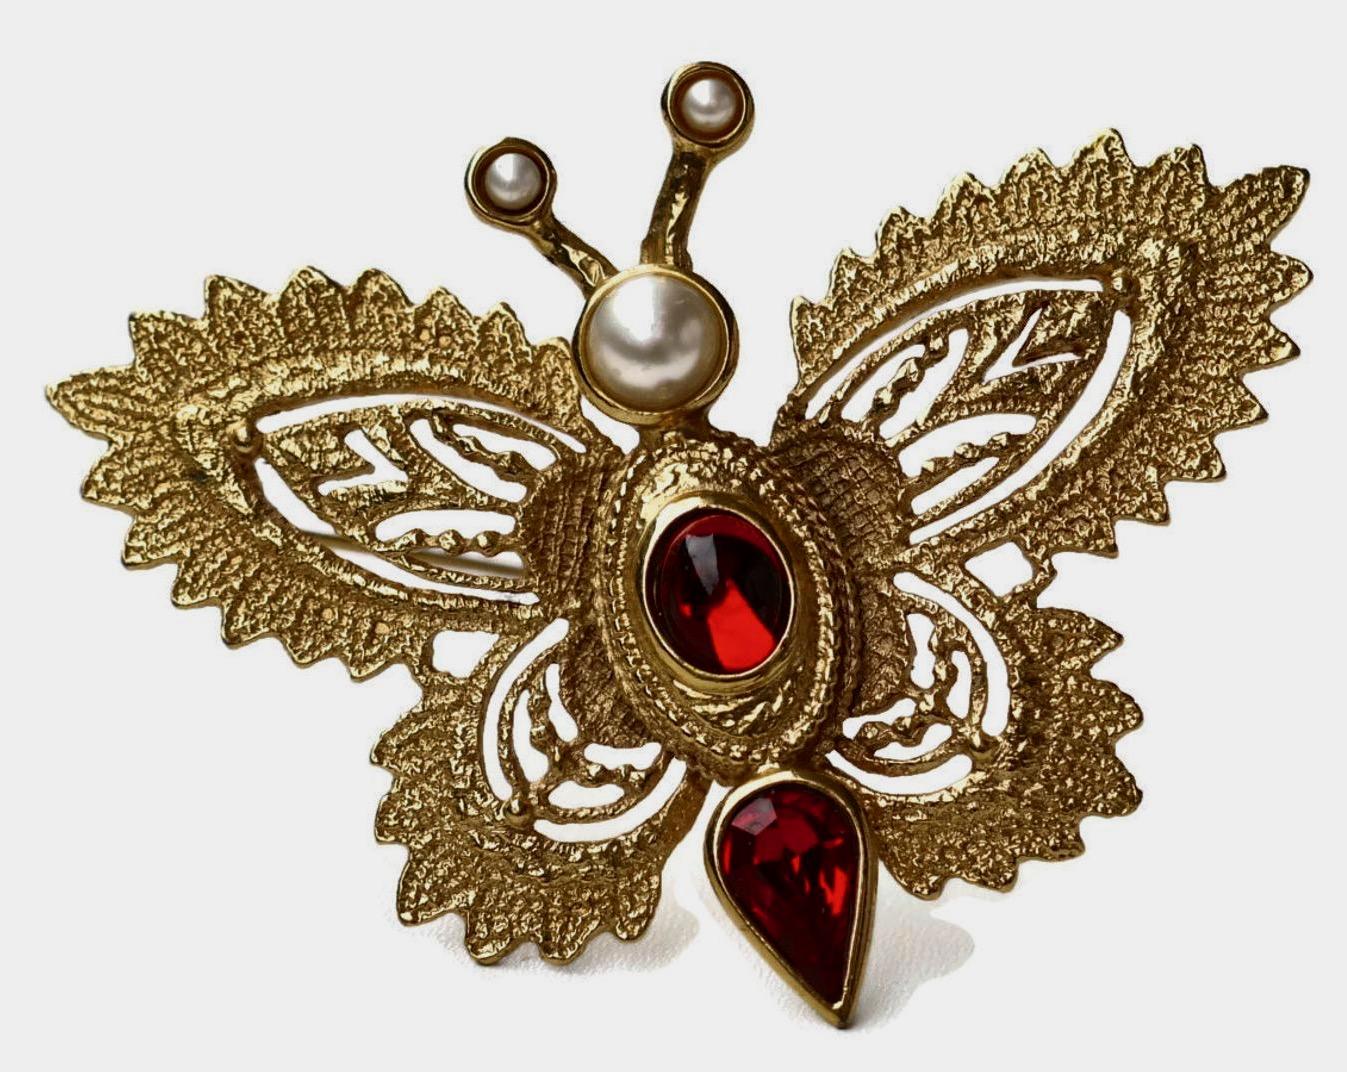 Vintage YVES SAINT LAURENT Butterfly Brooch by Robert Goossens

Measurements:
Height: 6 cms
Width: 8 cms

Features:
- 100% Authentic YVES SAINT LAURENT.
- Intricate gilt metal hardware in gold tone.
- Embellished with Faux Pearls (very minor